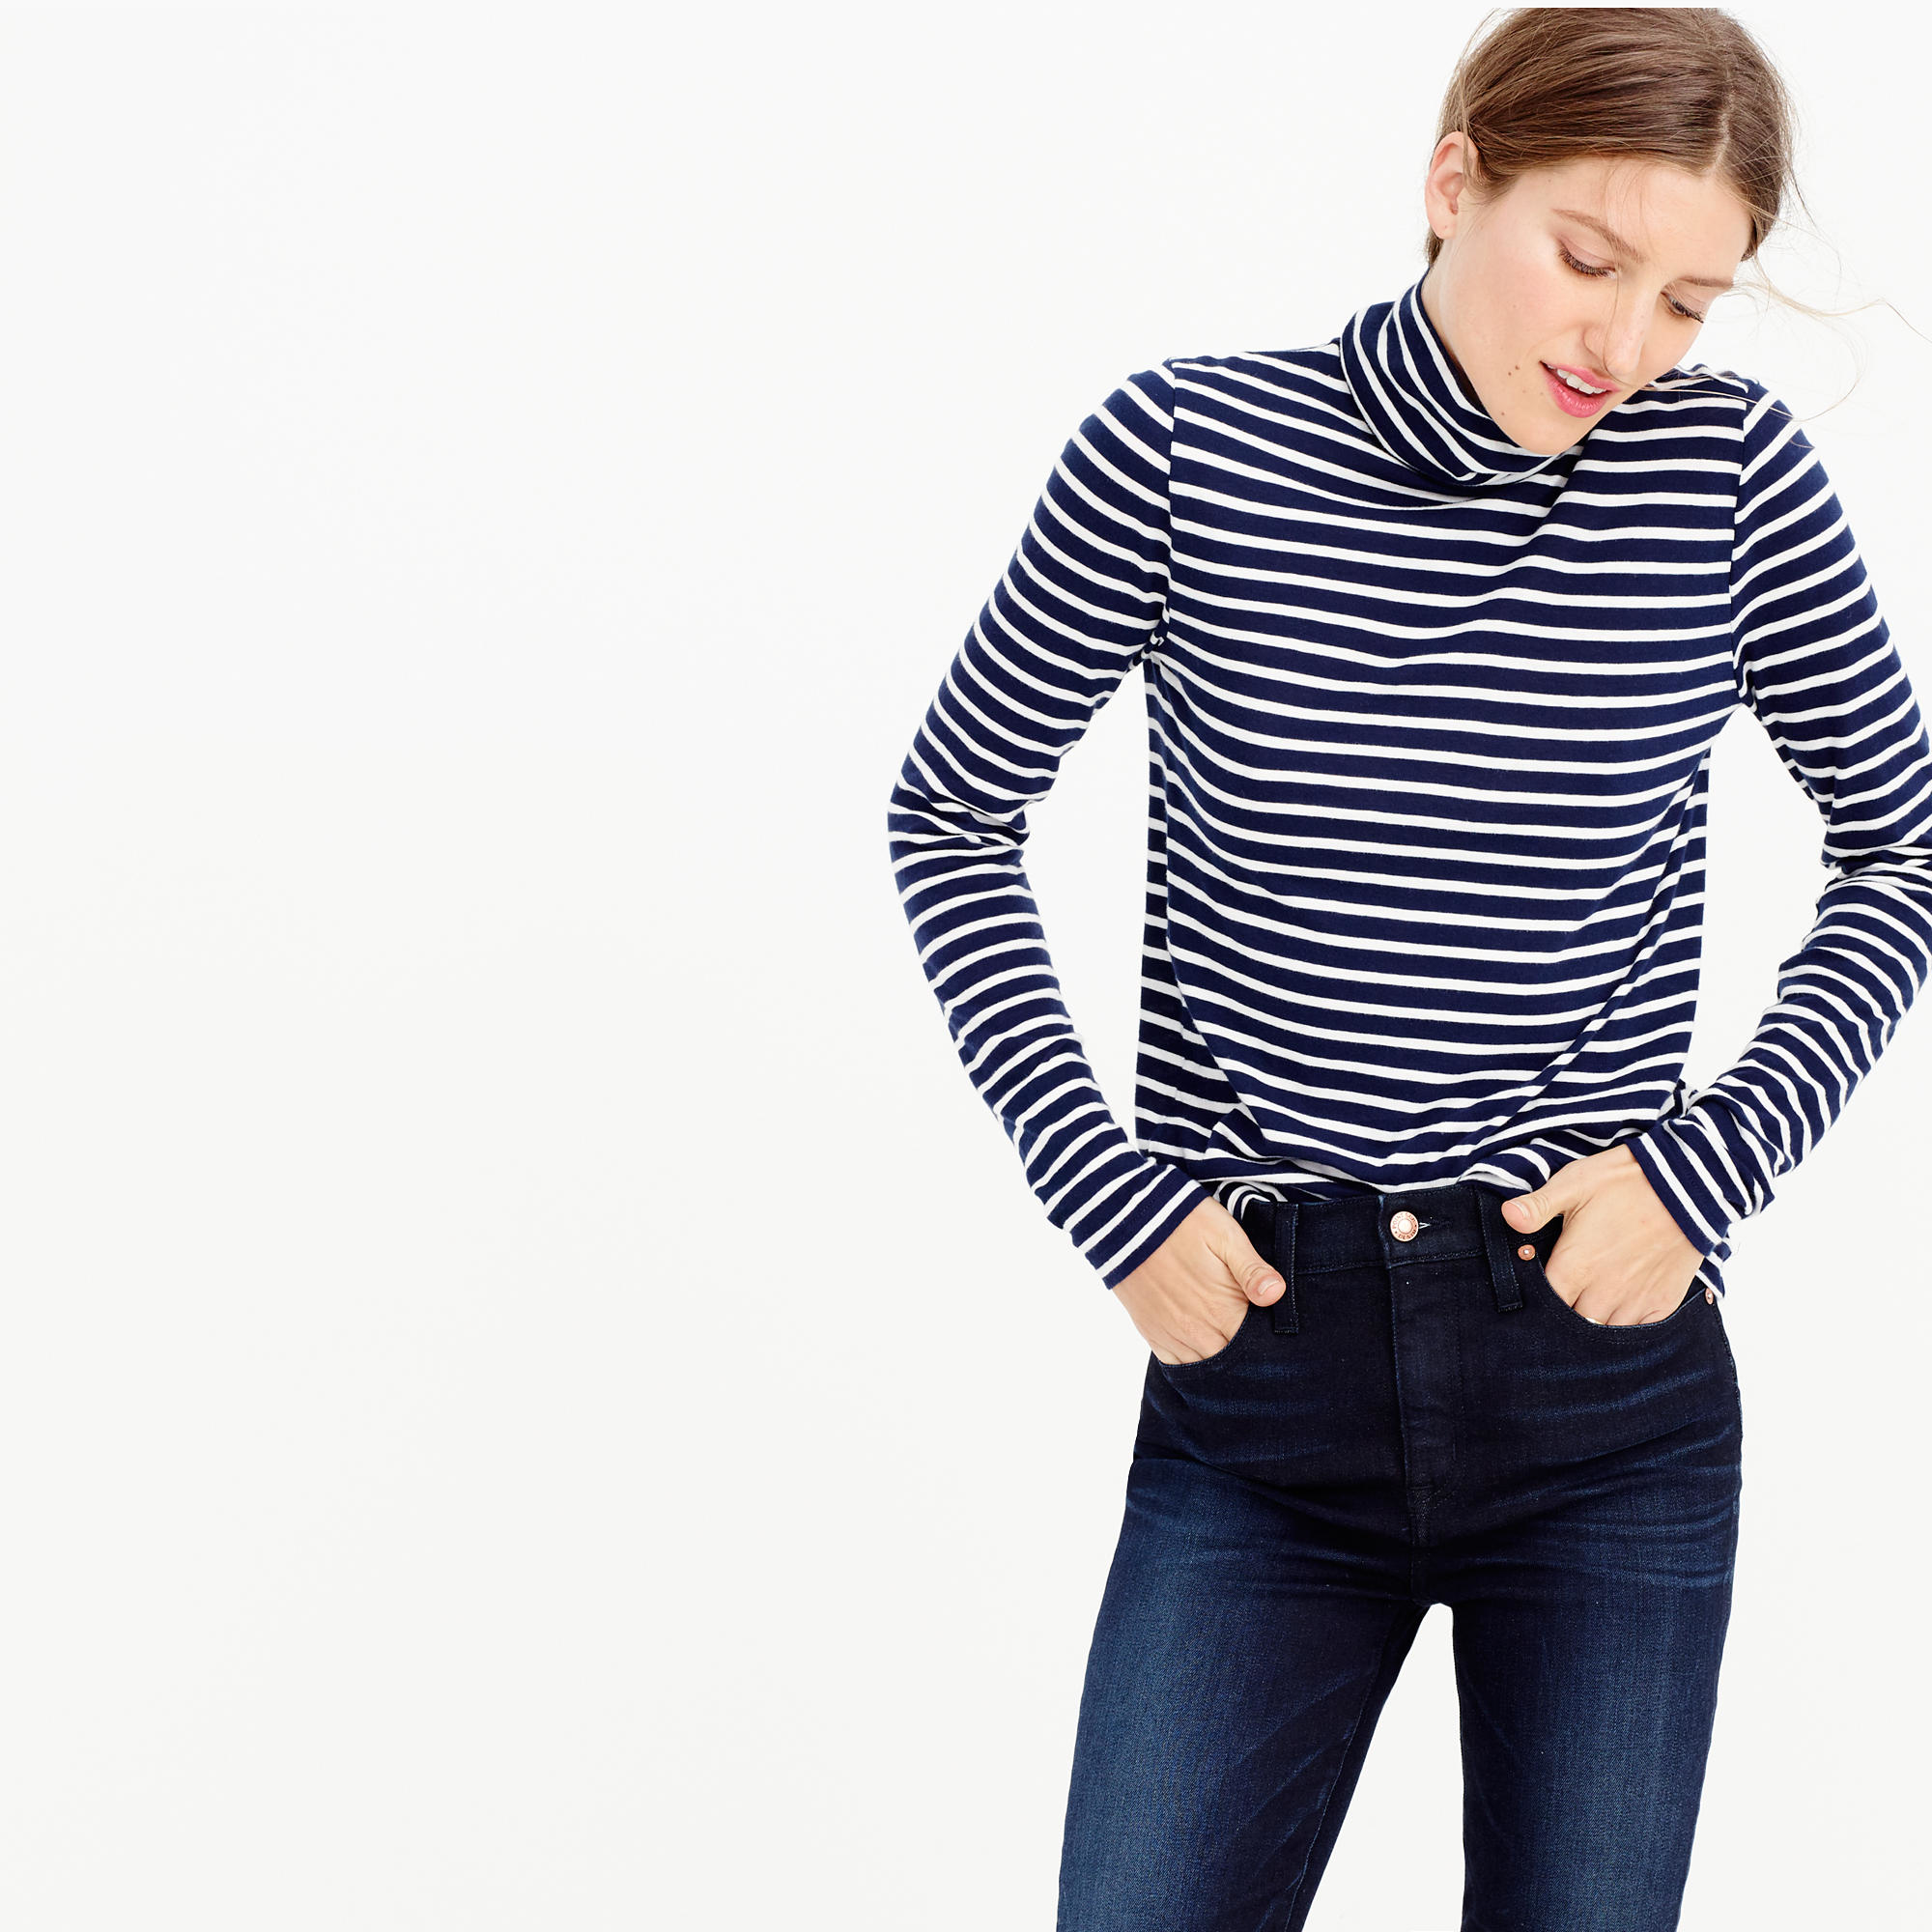 Mall j crew tissue turtleneck striped pants pattern lilly